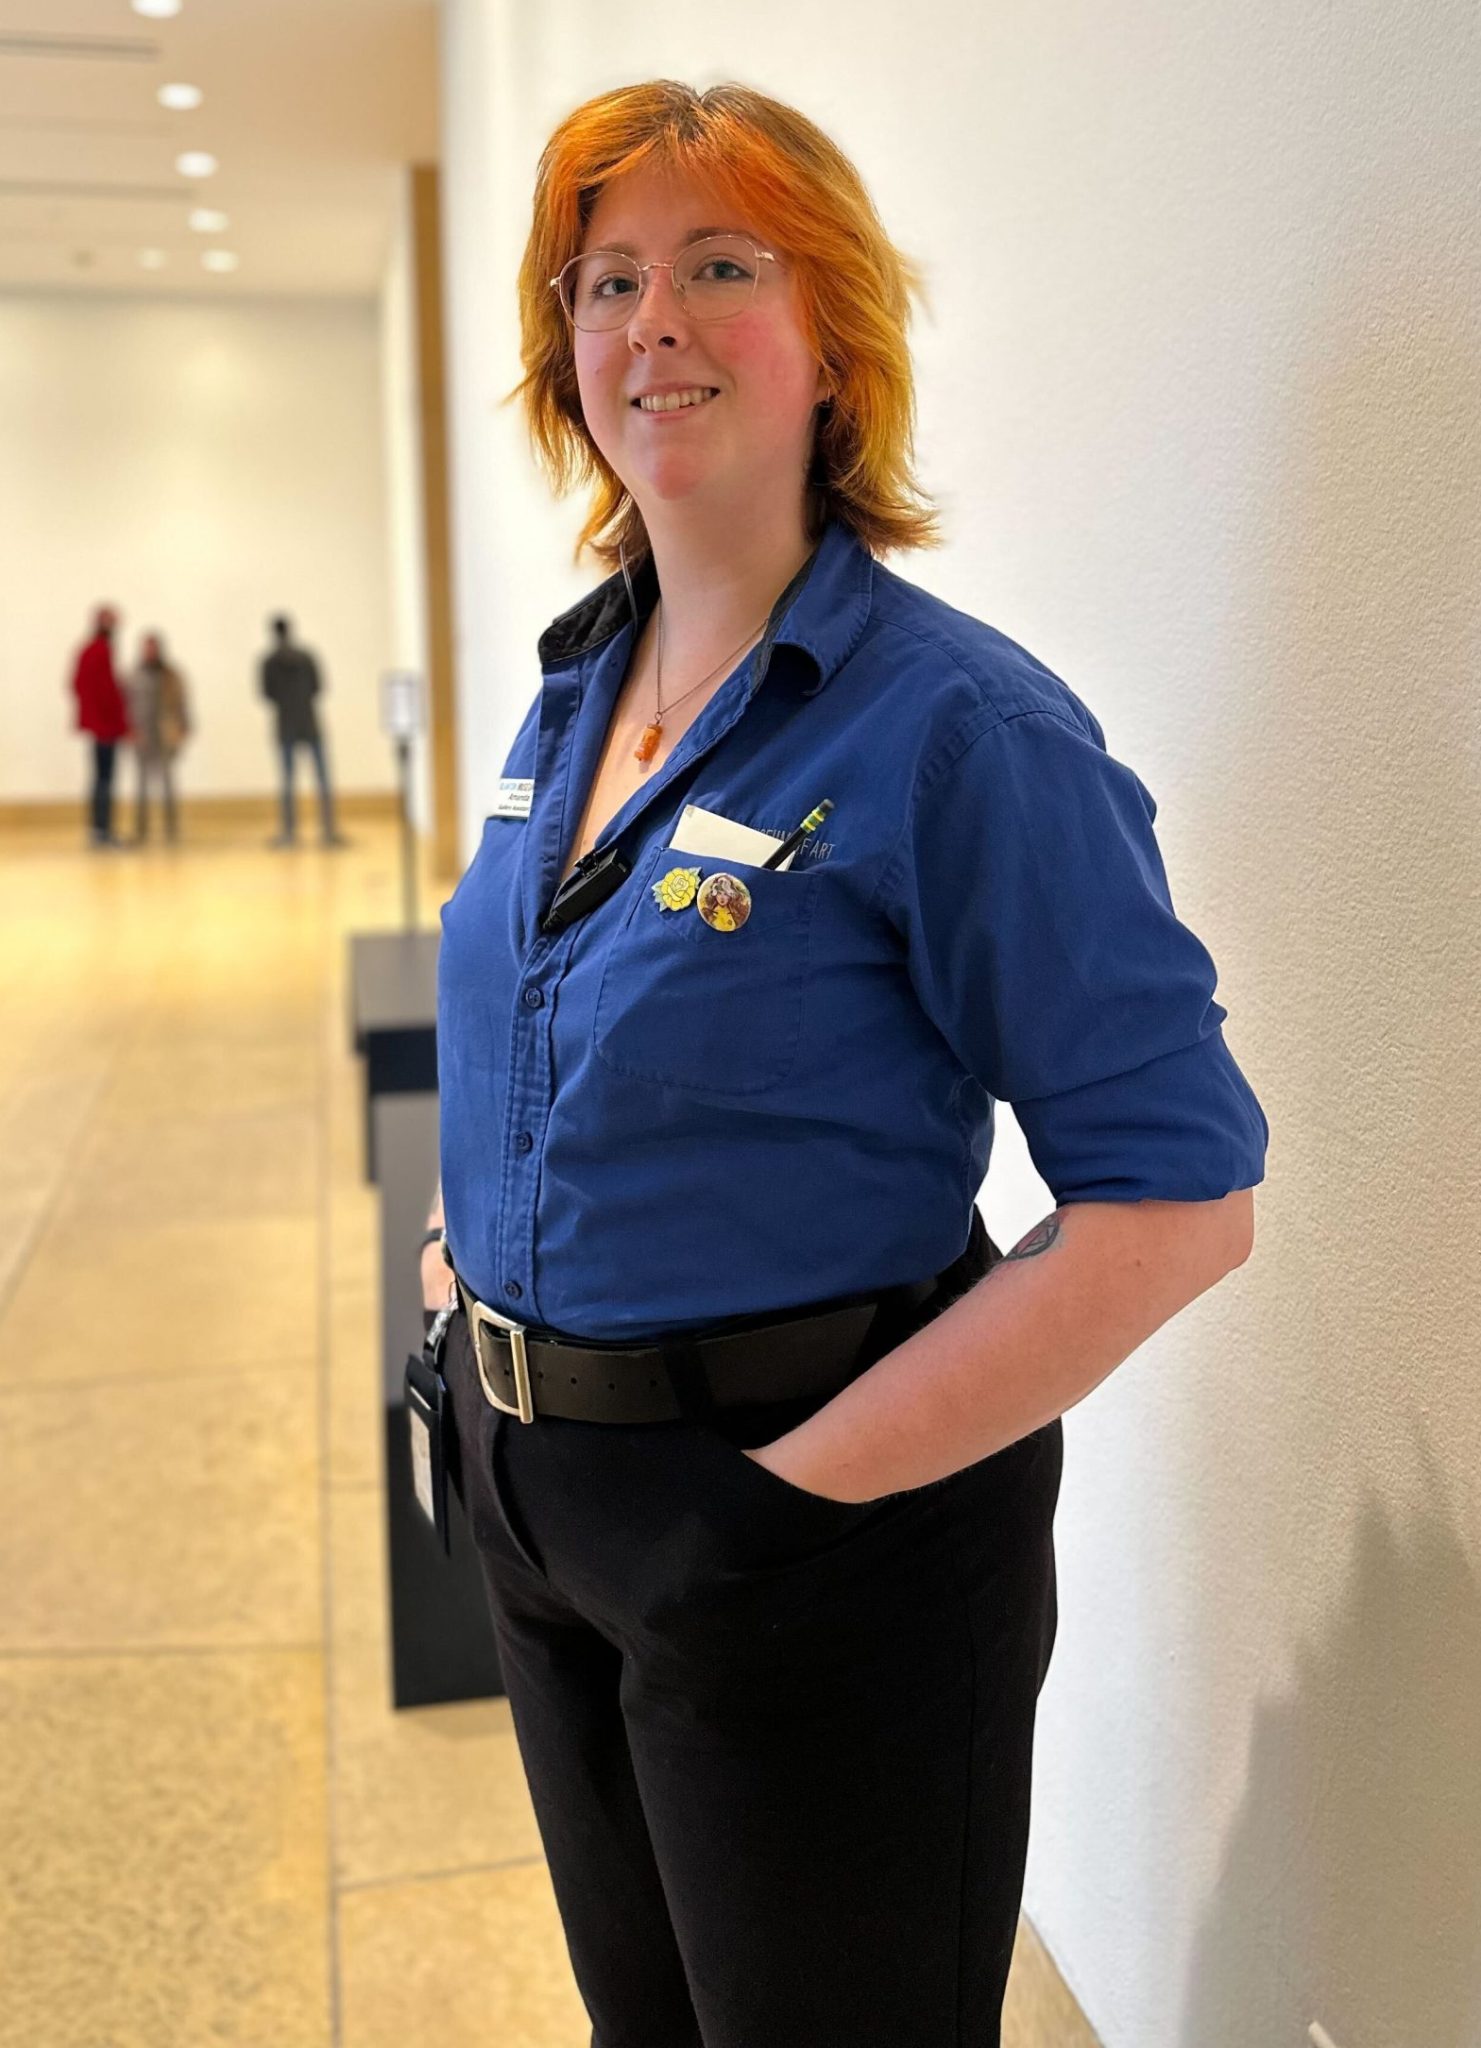 A person in a gallery wearing a blue shirt and name badge and an earpiece